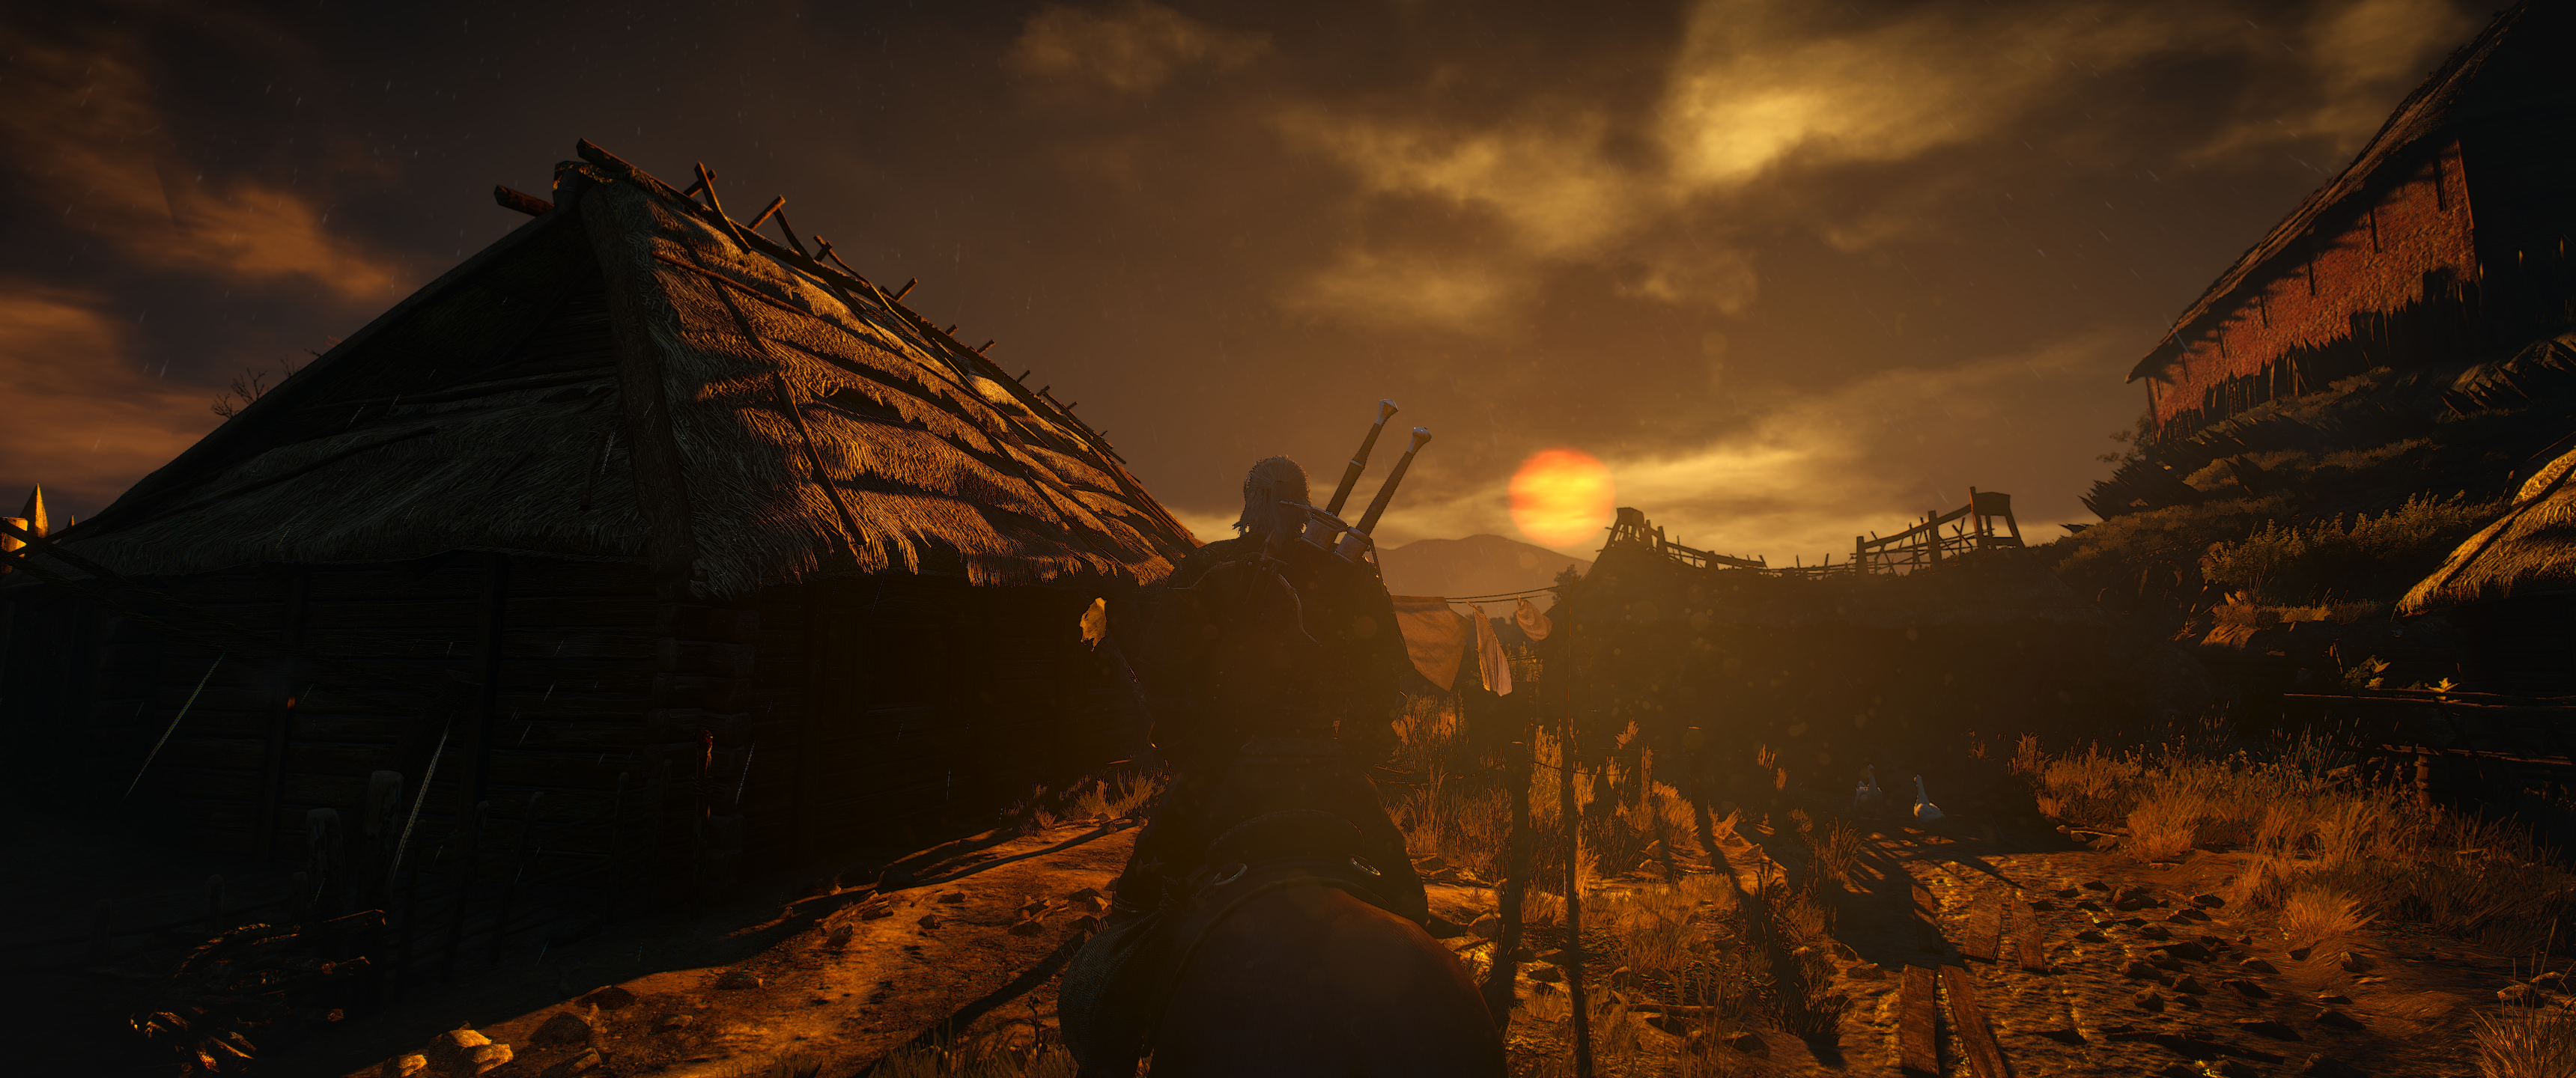 General 3440x1440 PC gaming The Witcher The Witcher 3: Wild Hunt landscape Geralt of Rivia sea mountains